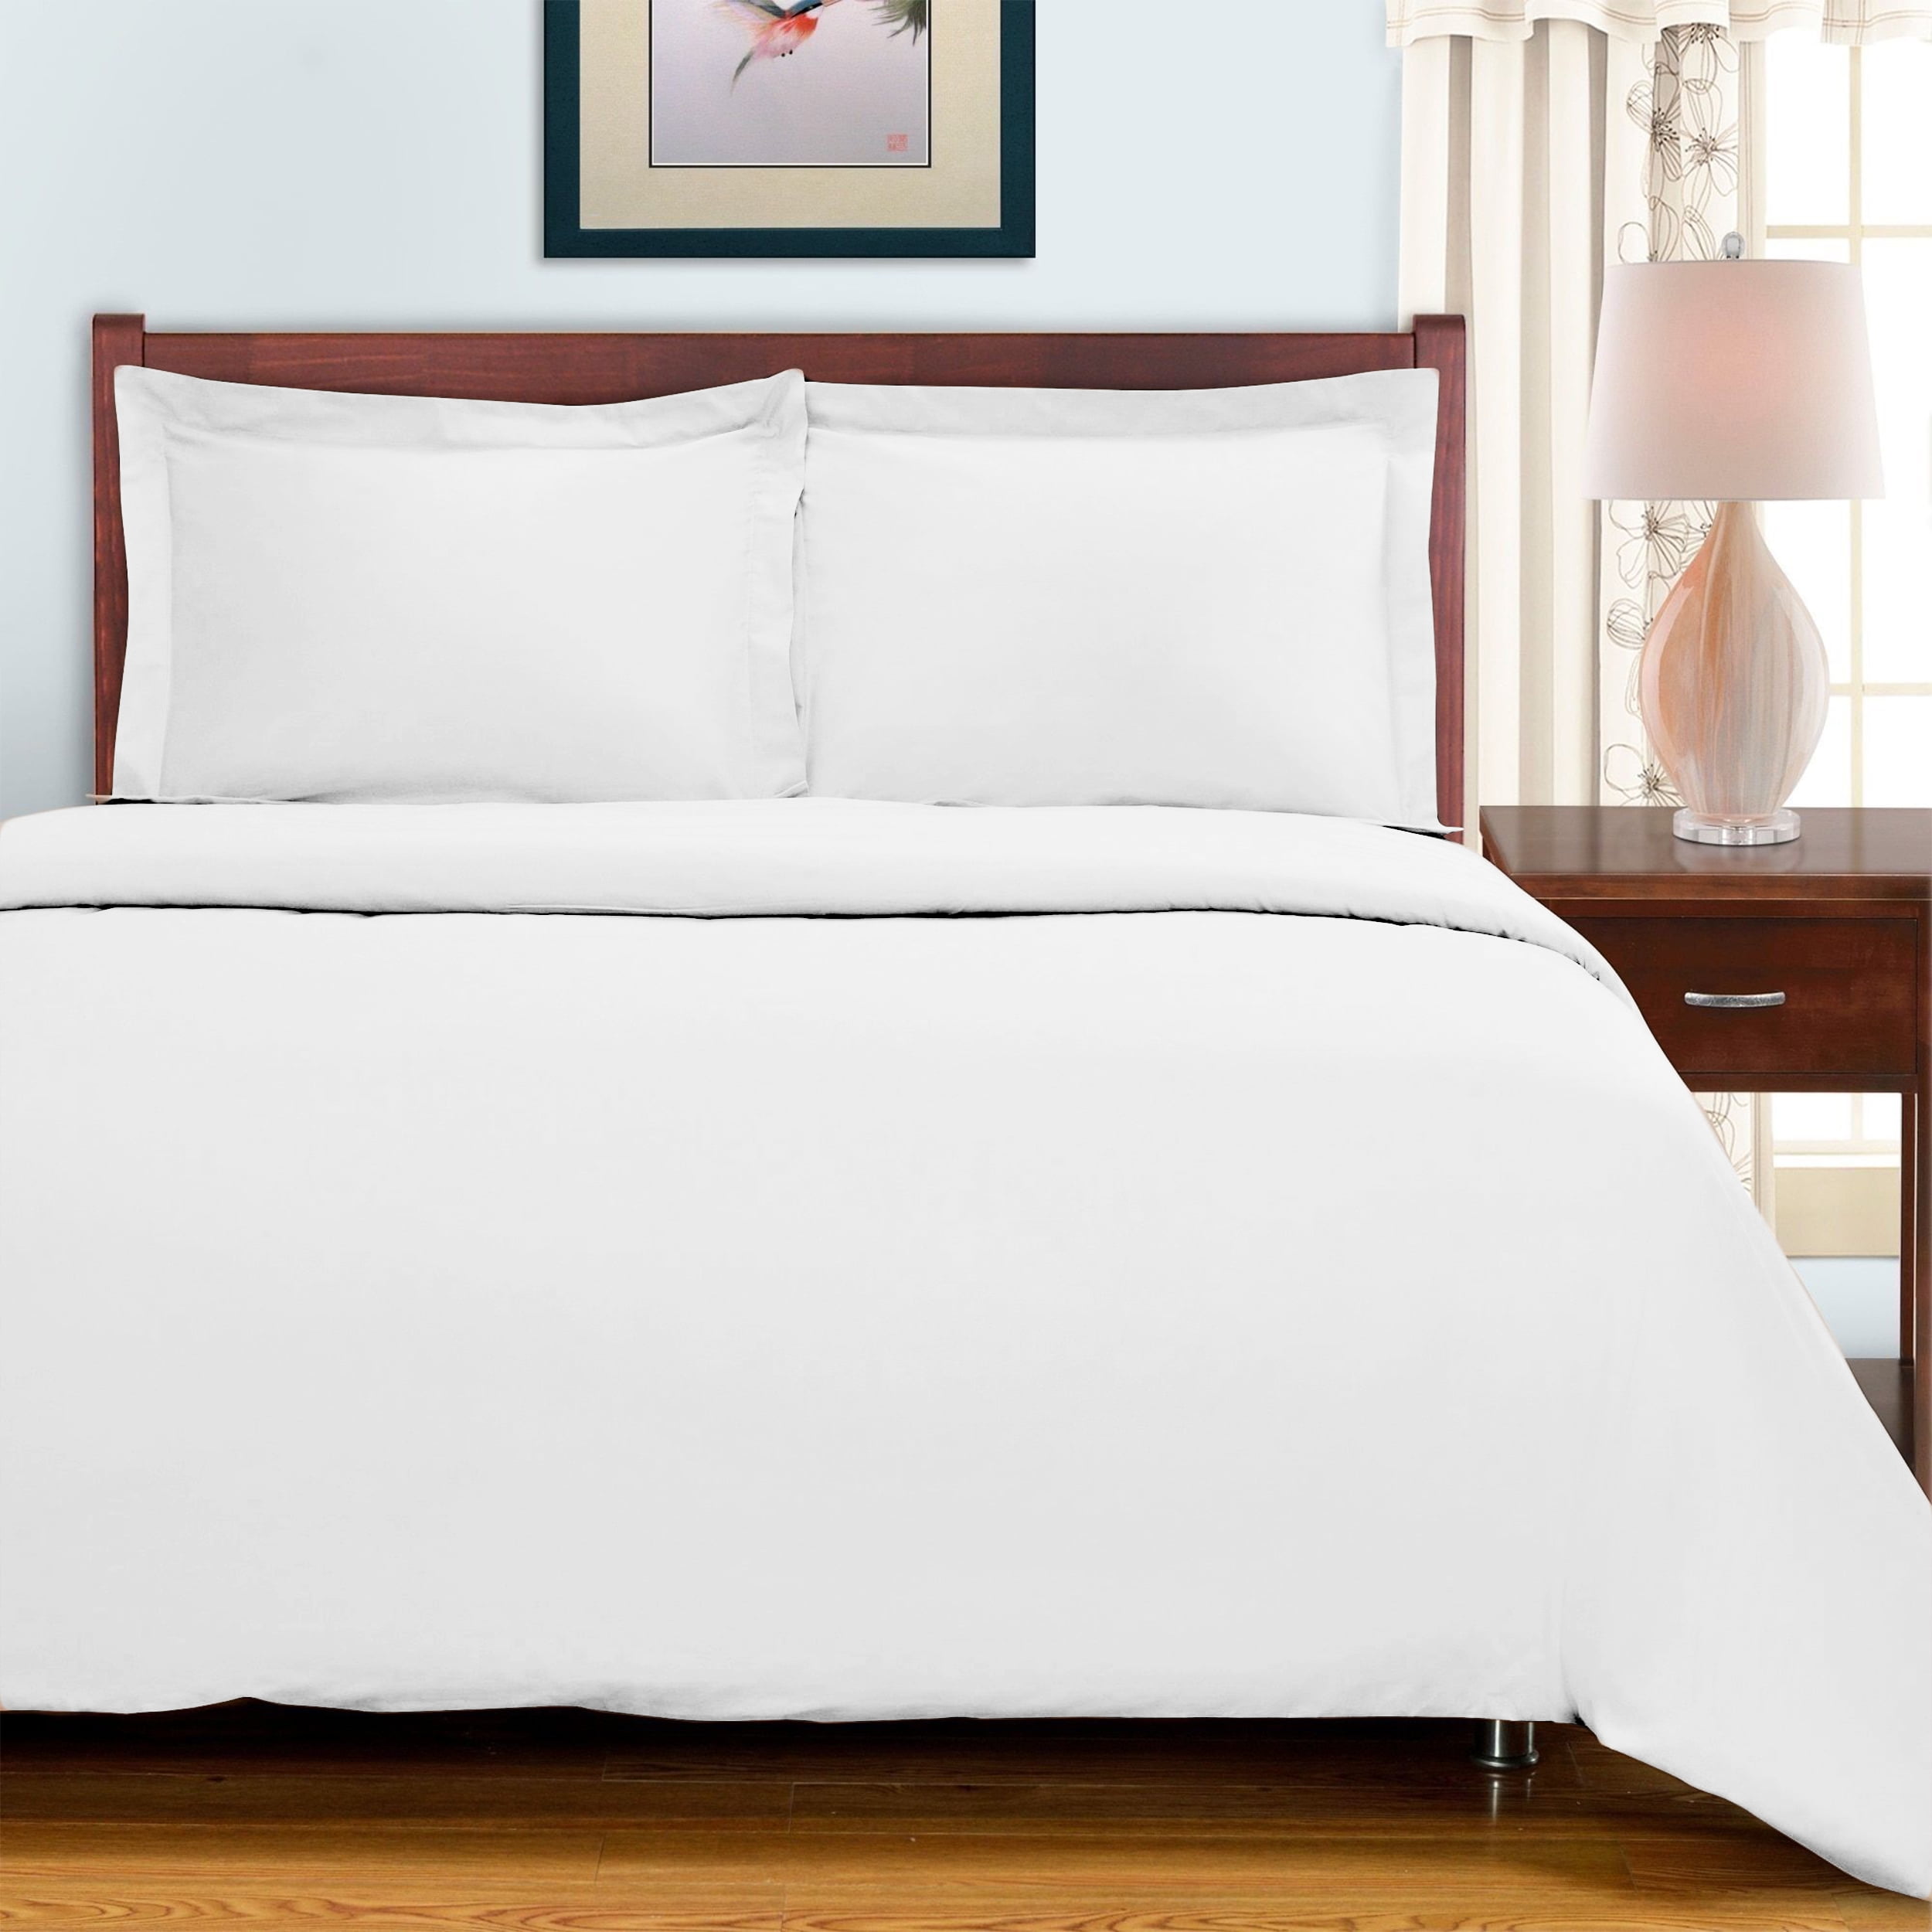 100% EGYPTIAN COTTON 300 THREAD COUNT DUVET QUILT COVER BEDDING WHITE or CREAM 